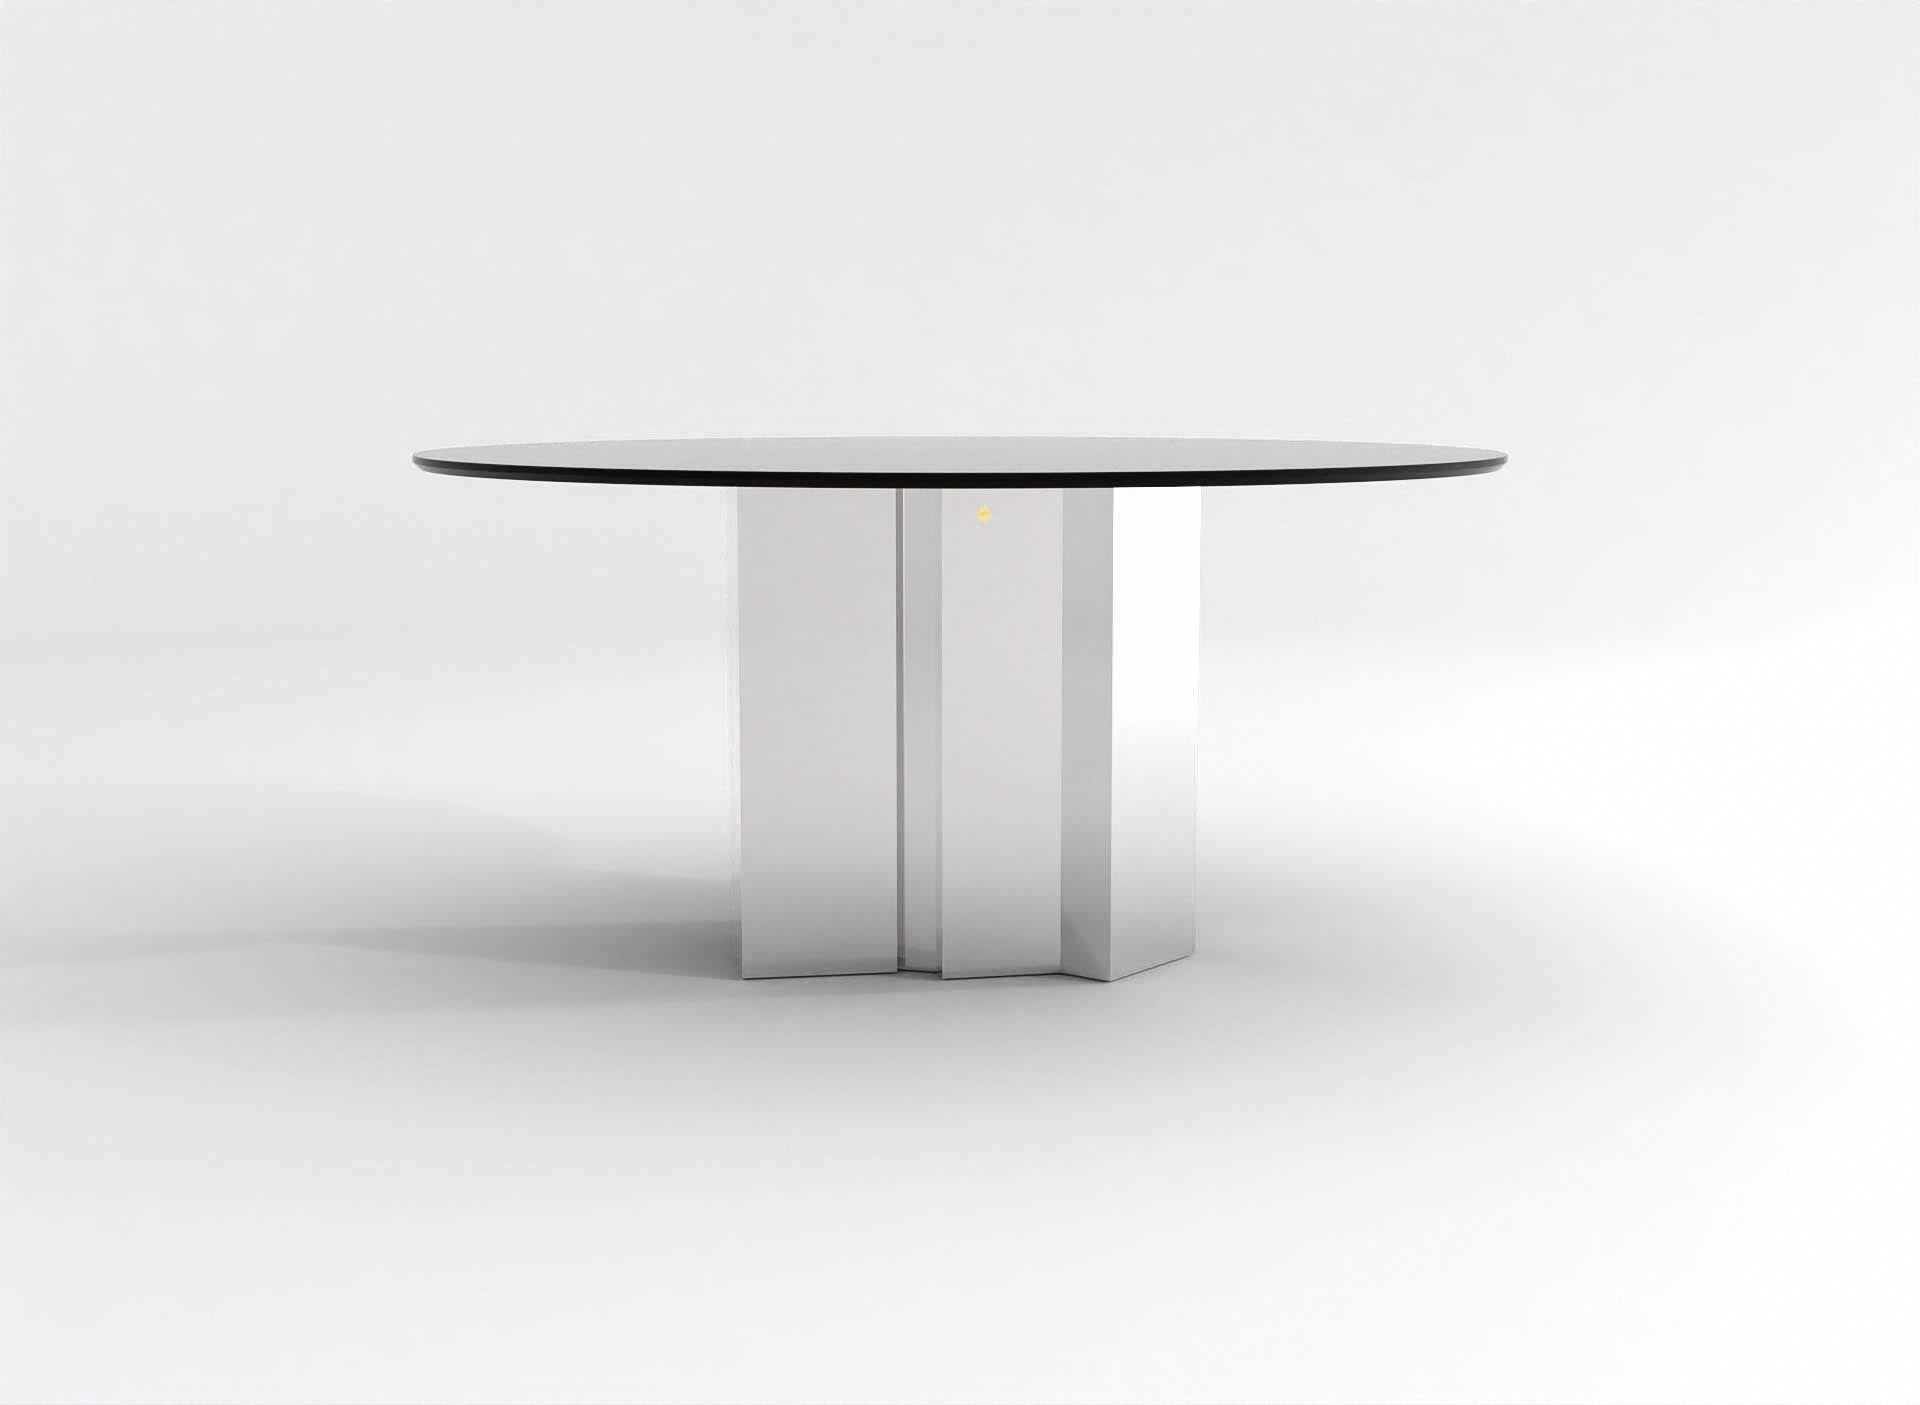 Our barh beam table deserves being in the center of attention. The heavy, robust and stable base contrasts stunningly with the elegantly thin and fragile table top. The architectural character of the central leg excites the mind along all sides.